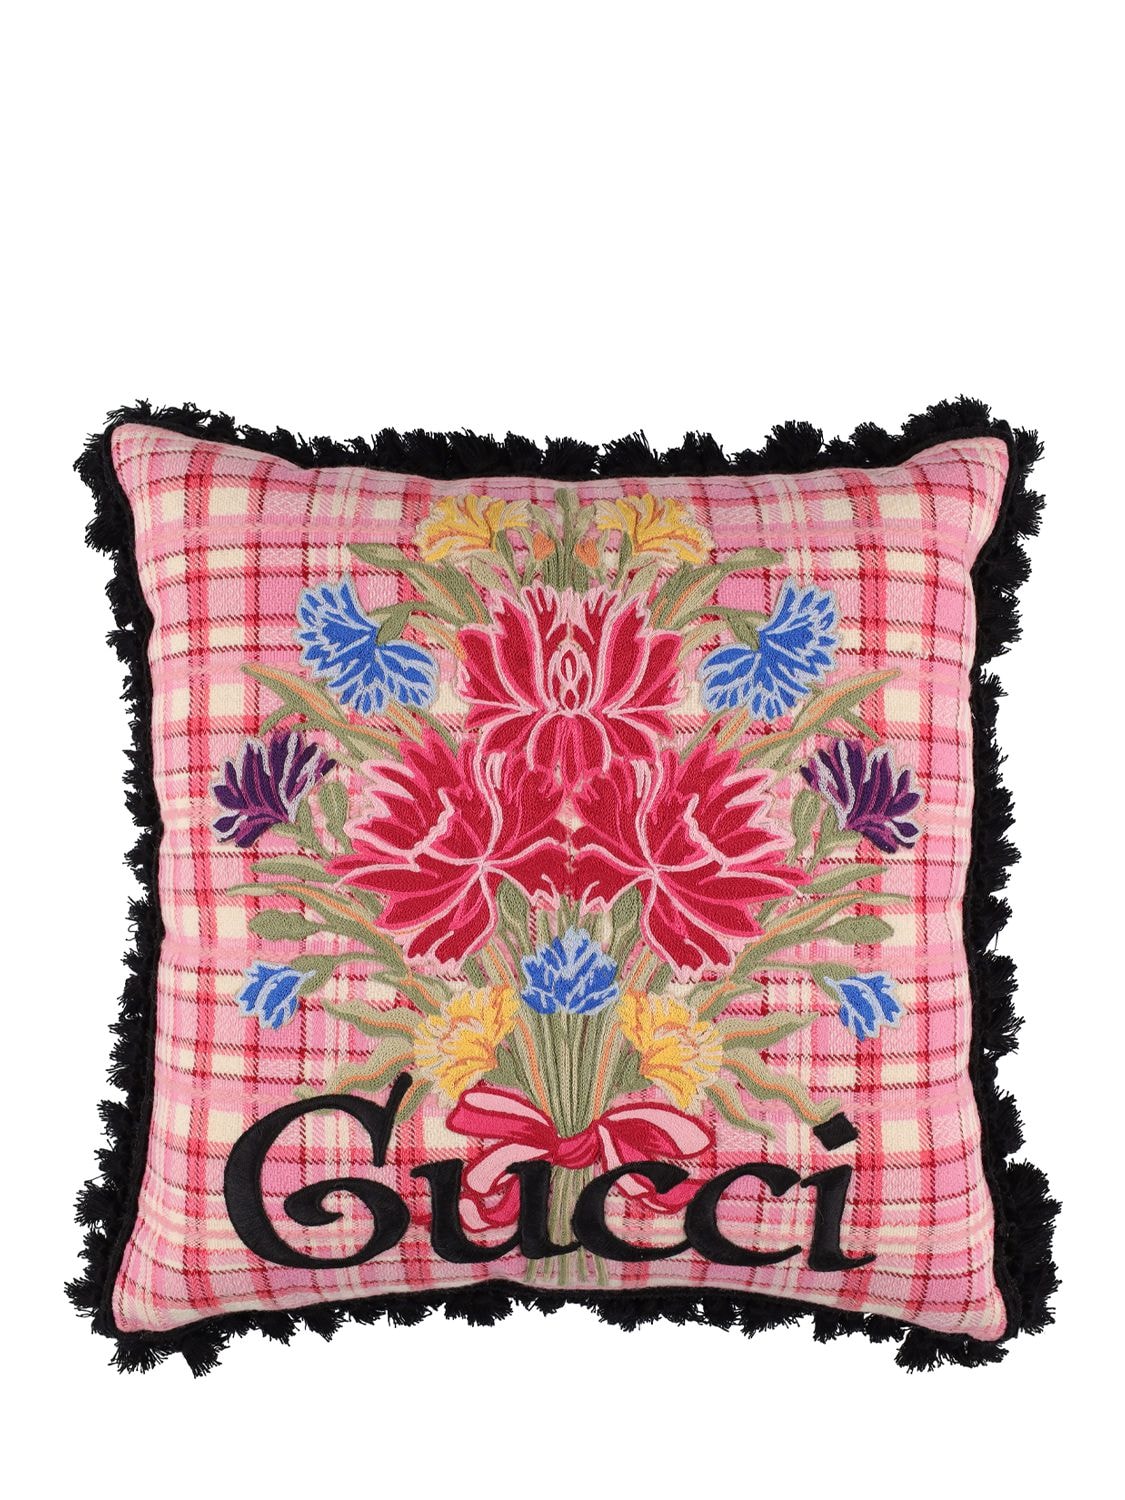 Gucci Logo Embroidered Cushion In Vivid Pink,blac